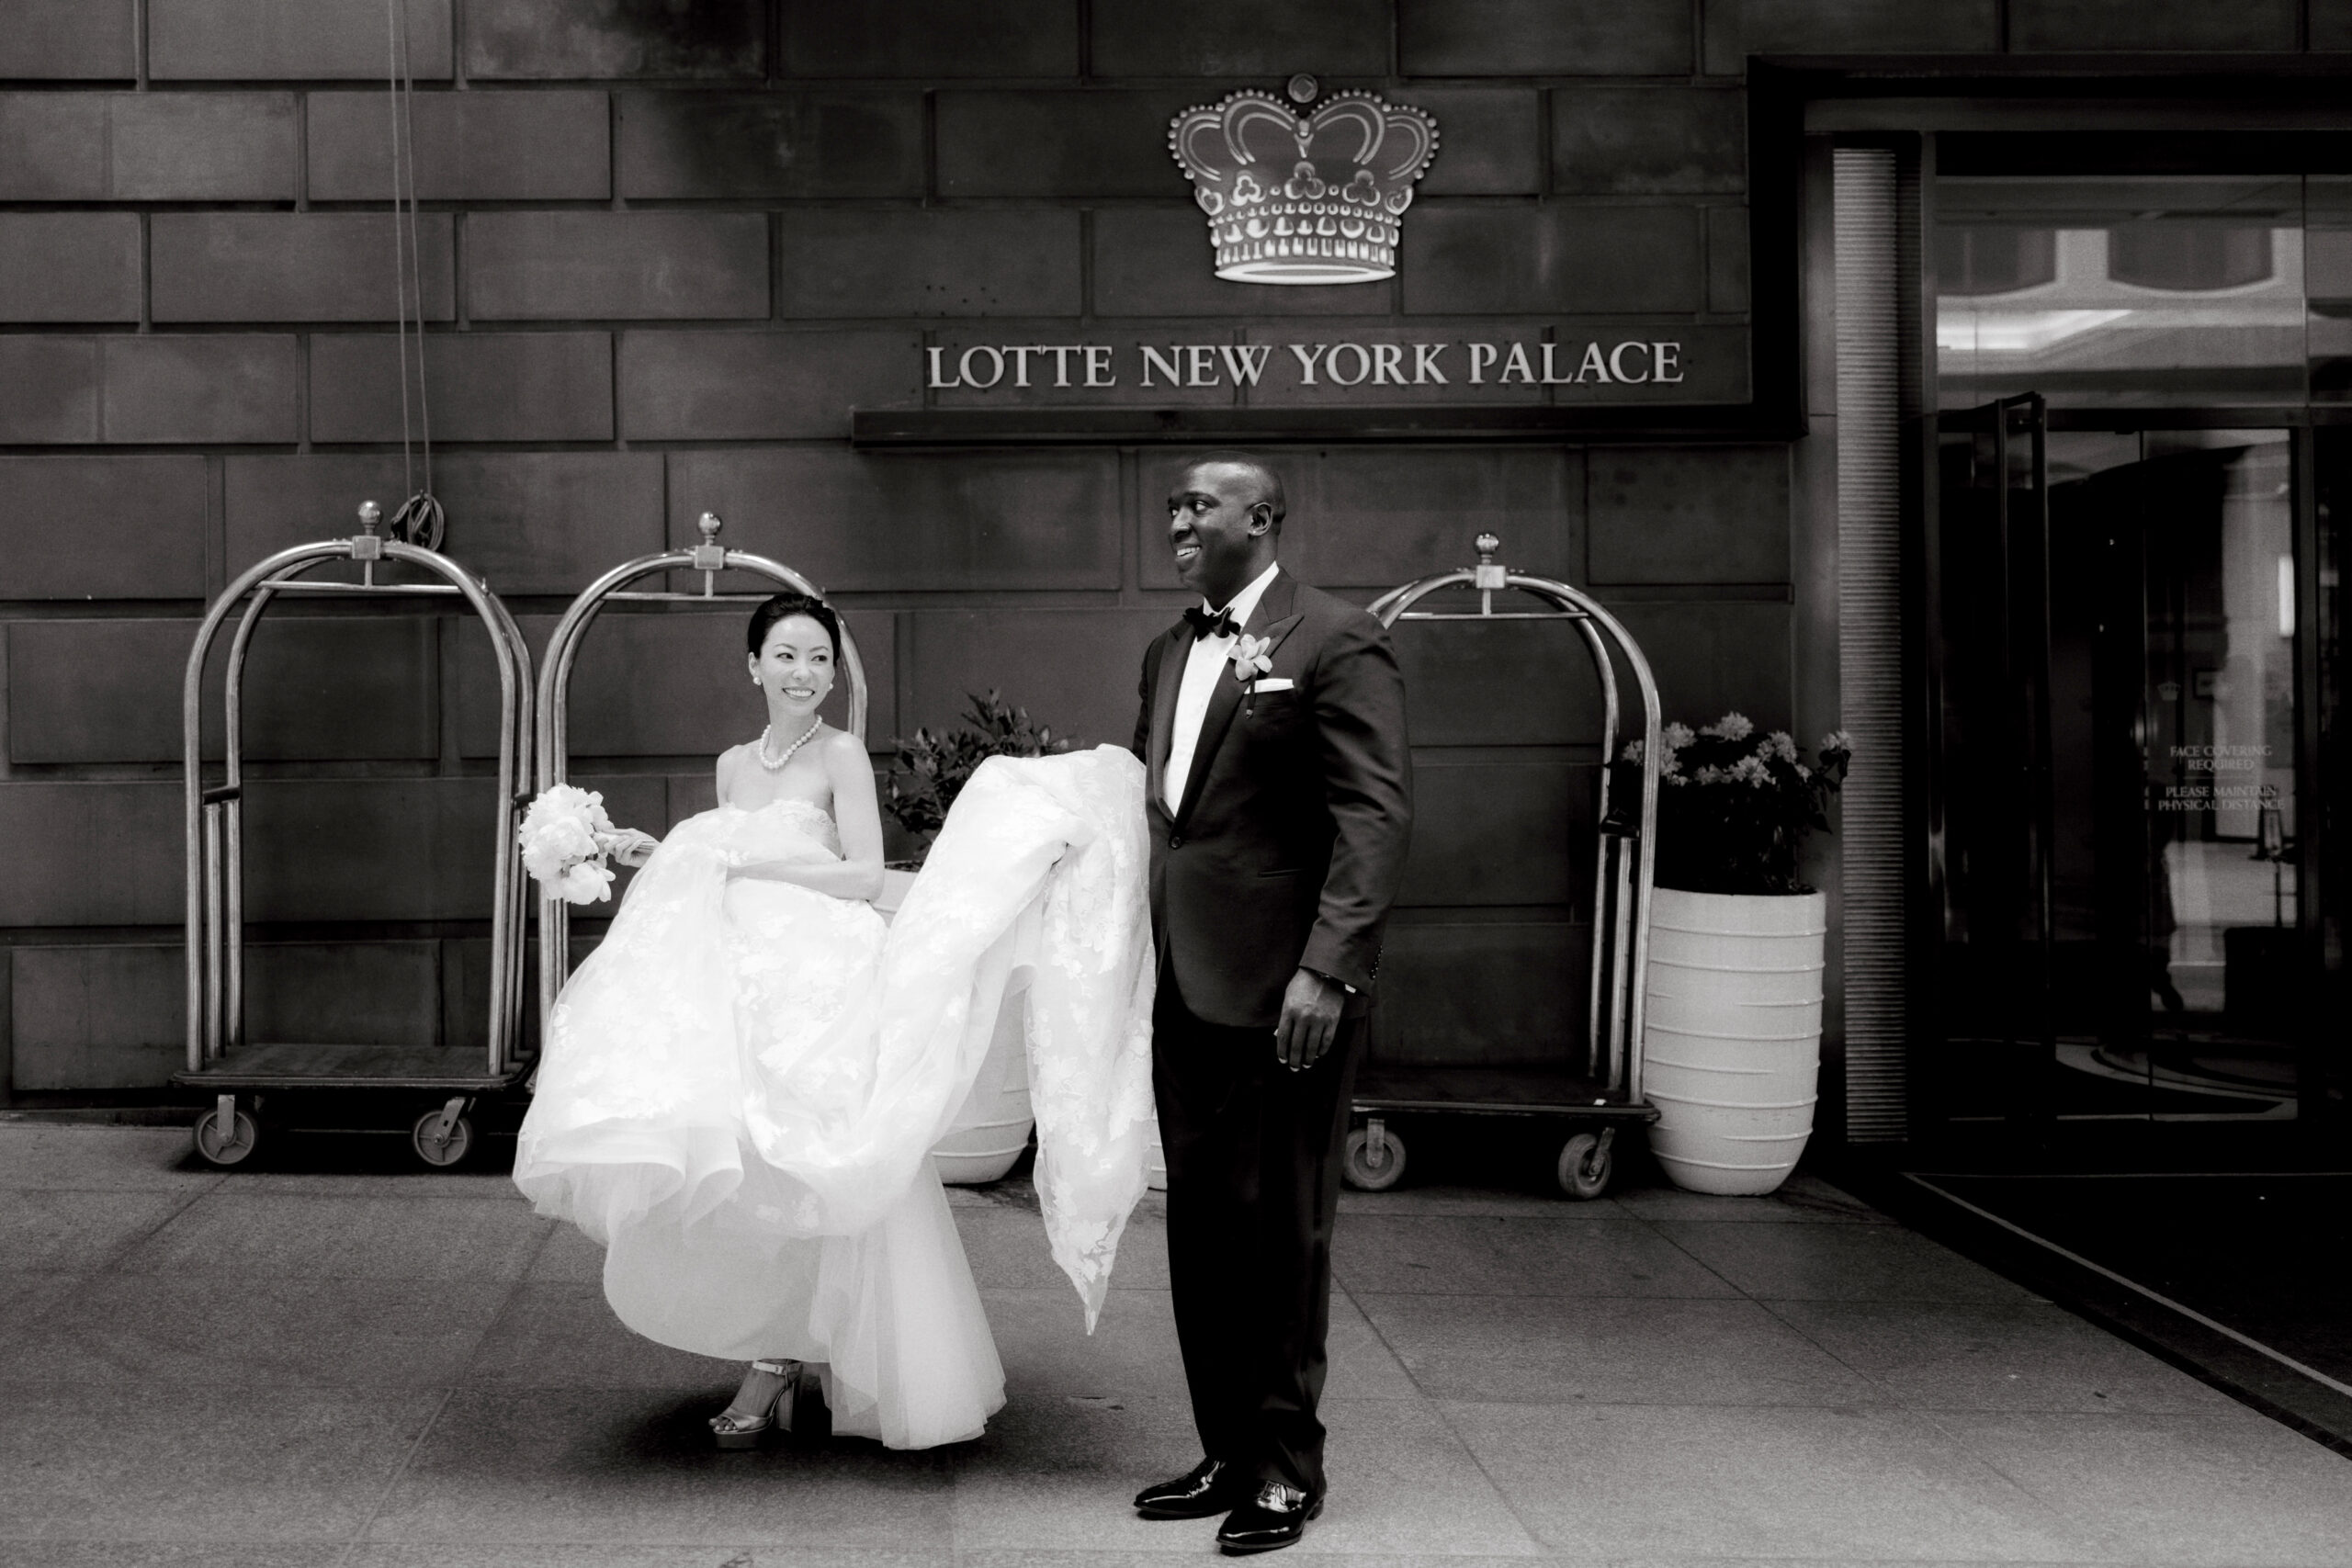 Black and white photo of the bride and groom at Lotte New York Palace. Wedding photography styles image by Jenny Fu Studio